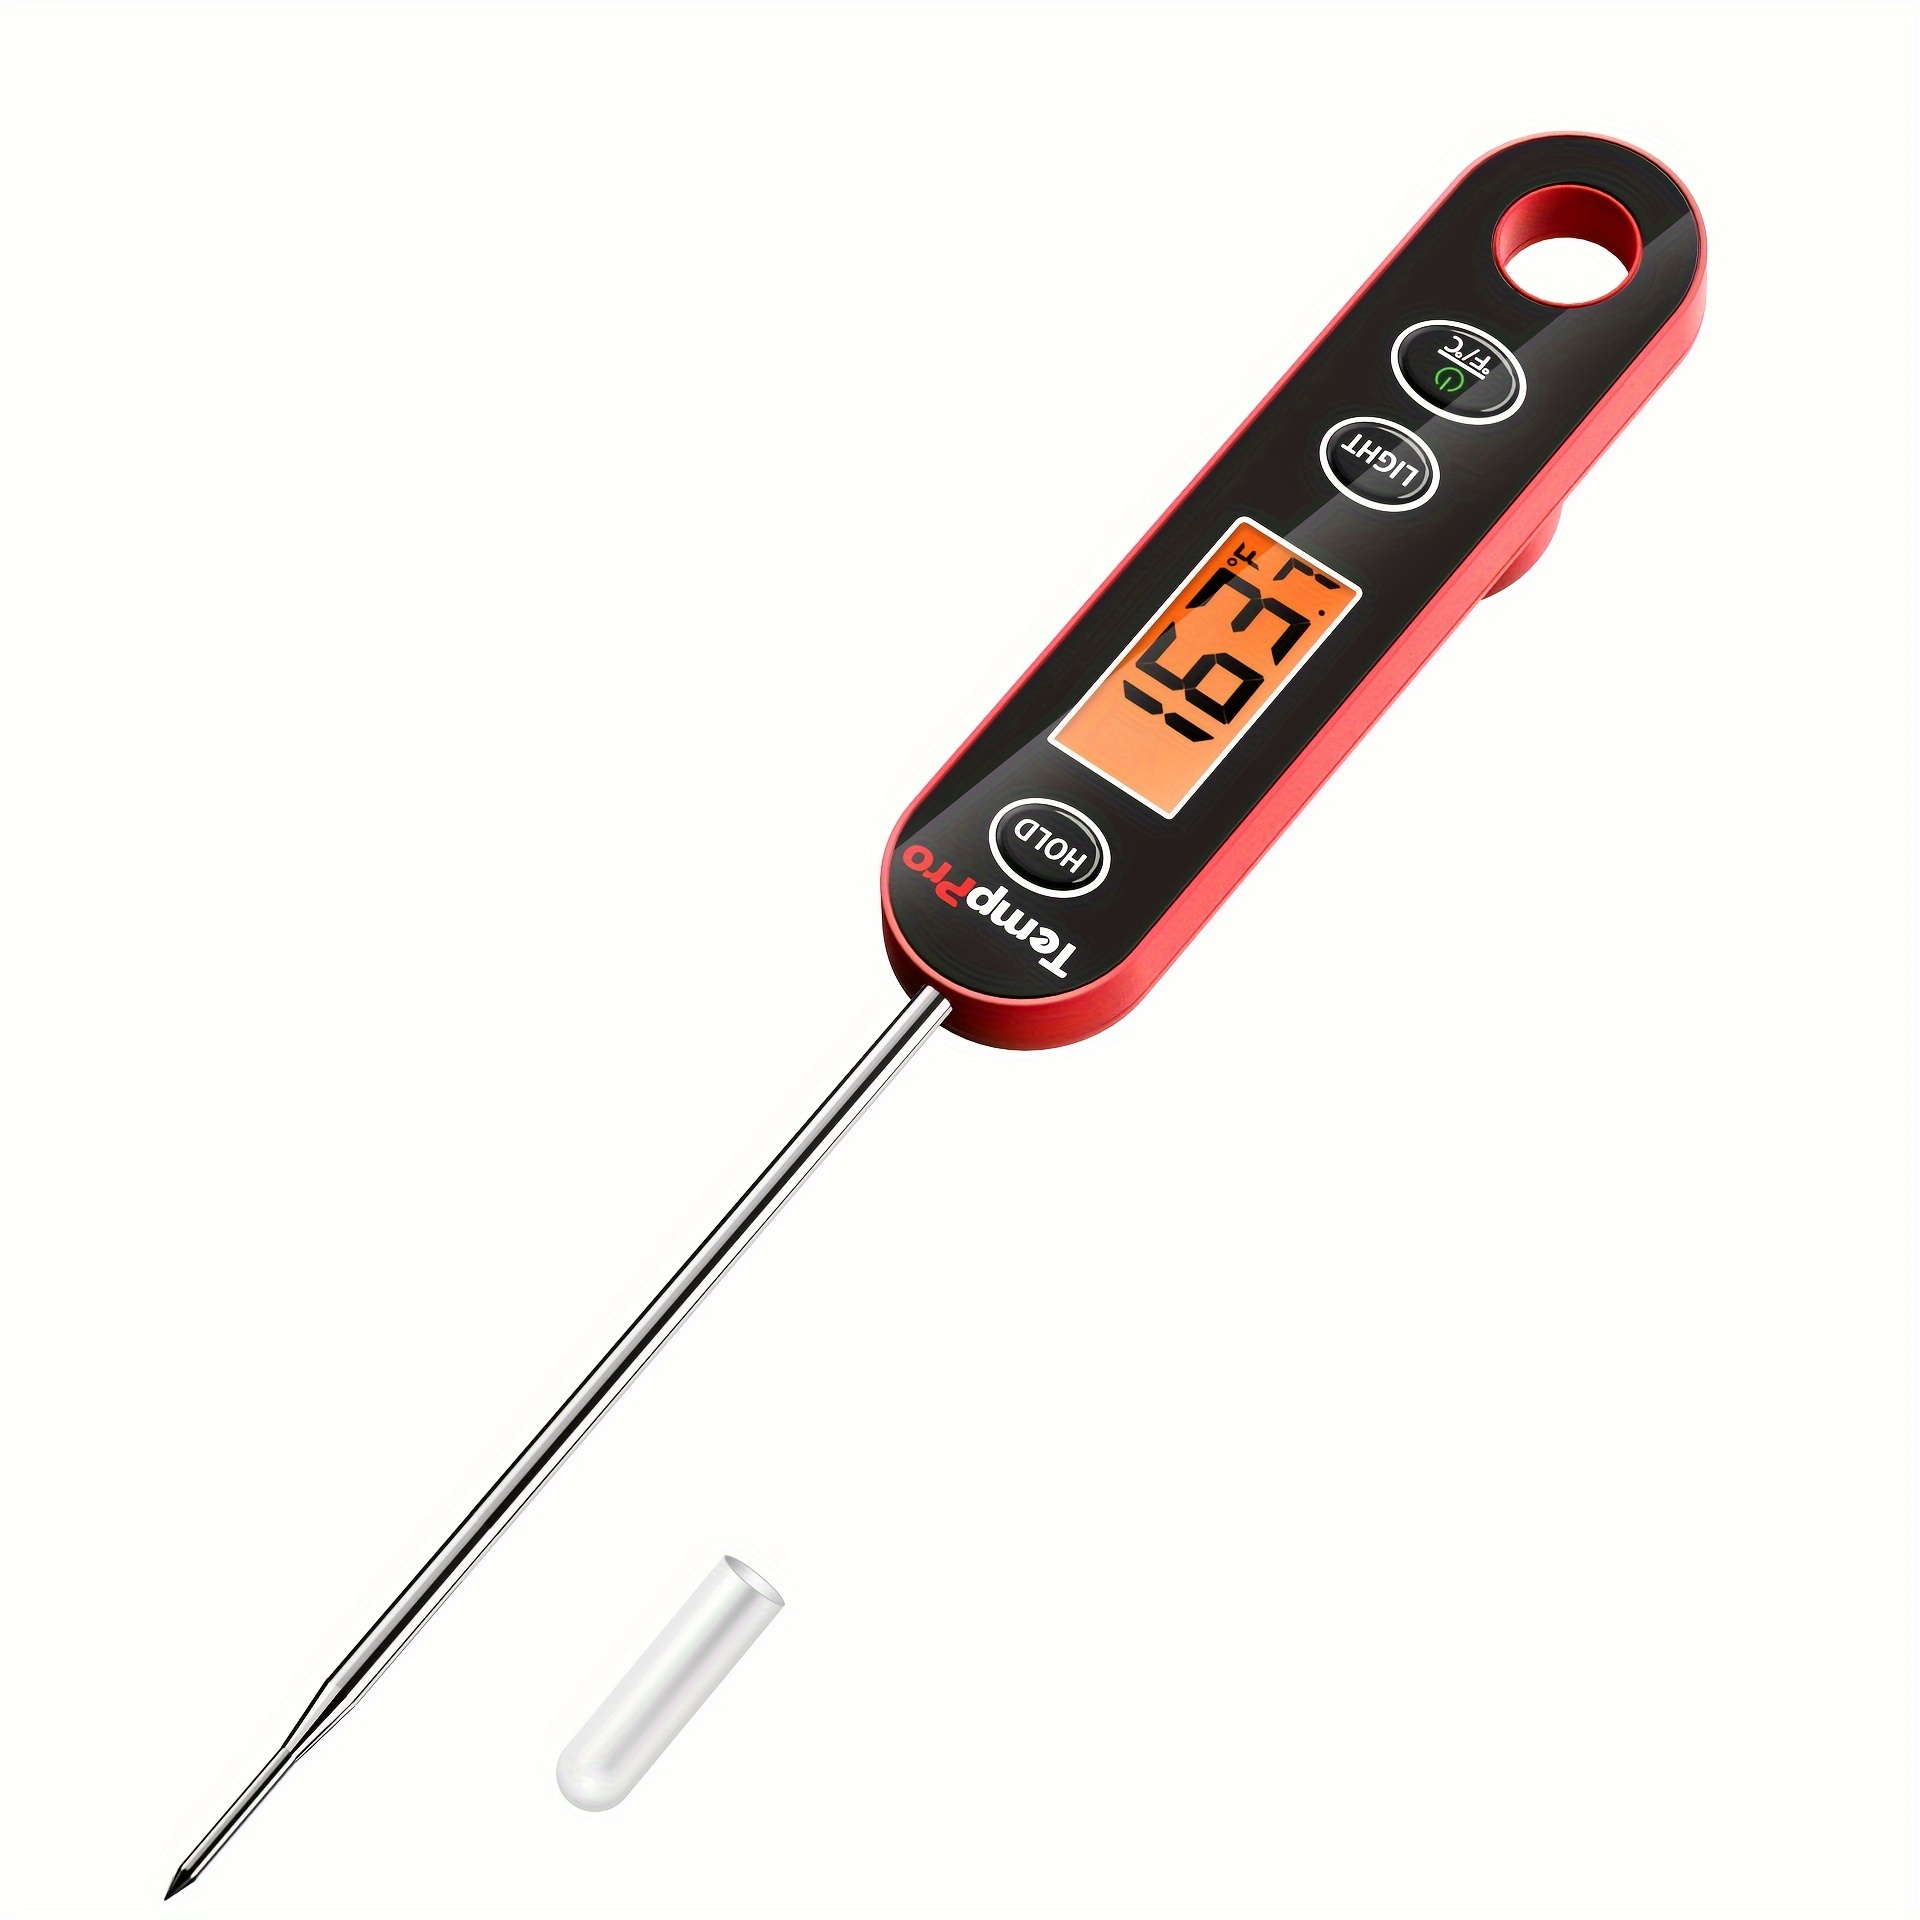 

Temppro Ic6030 Digital Meat Thermometer With 4.72" Long Probe Kitchen Instant Read Meat Thermometer For Bbq Grilling Oil Deep Fry Candy, Cookingthermometer With Large Backlit Display